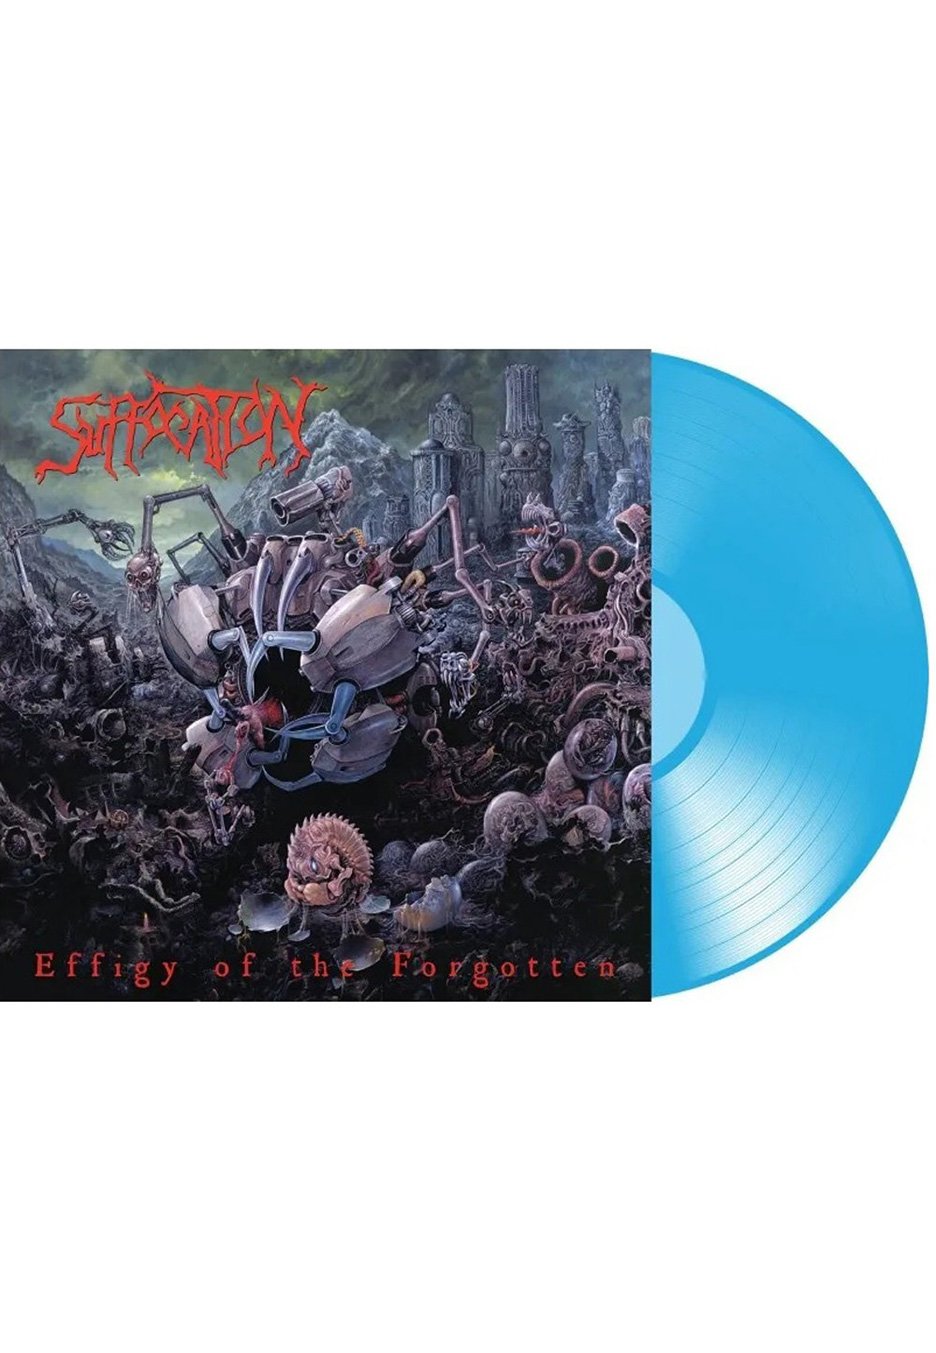 Suffocation - Effigy Of The Forgotten Transparent Blue - Colored Vinyl